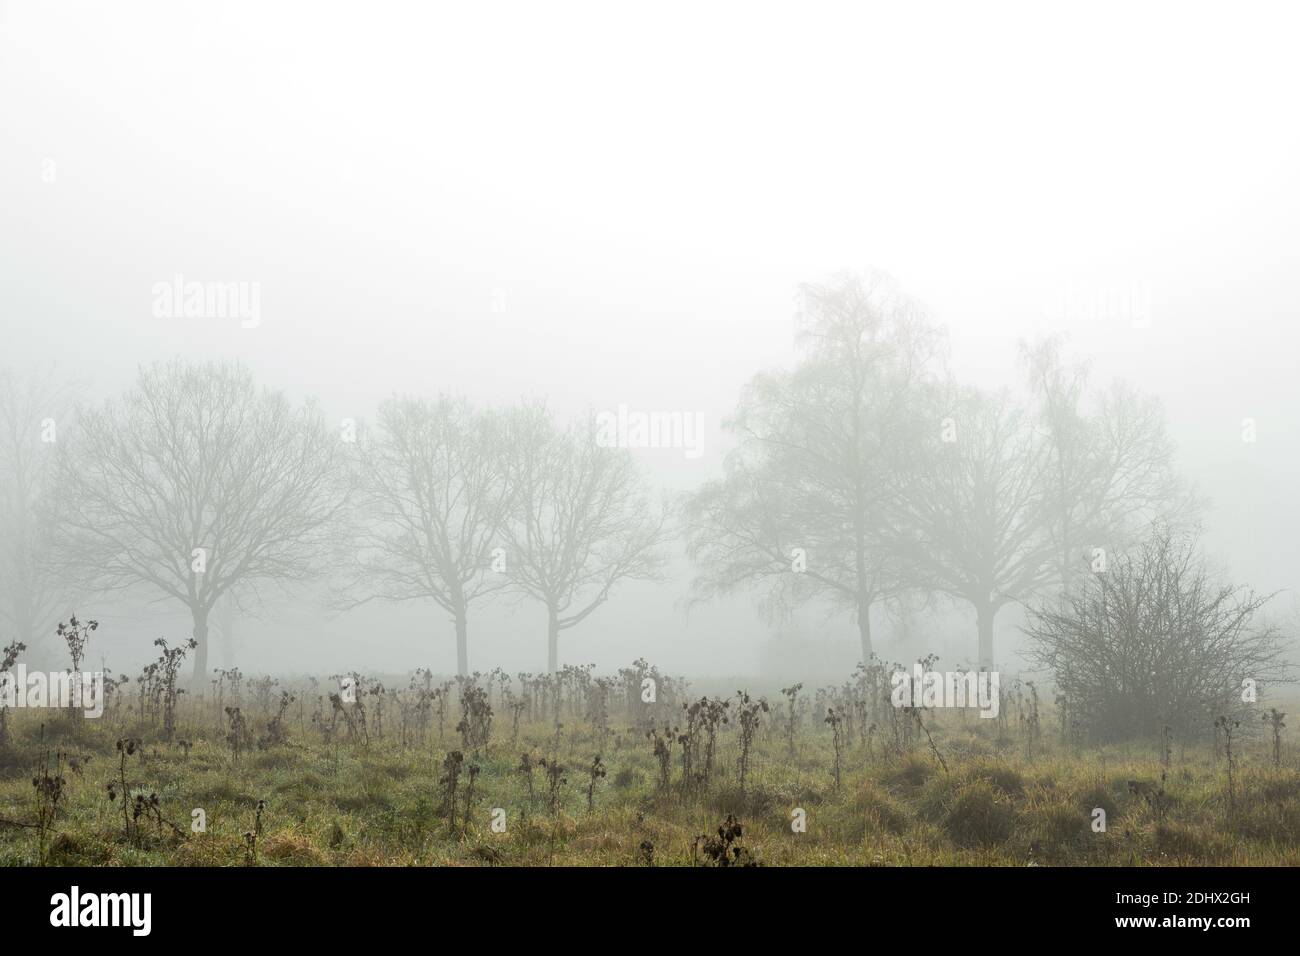 Ghostly trees in mist and fog in distance distance with foreground dead undergrowth in meadow against a white sky feeling lost and without hope. High Stock Photo